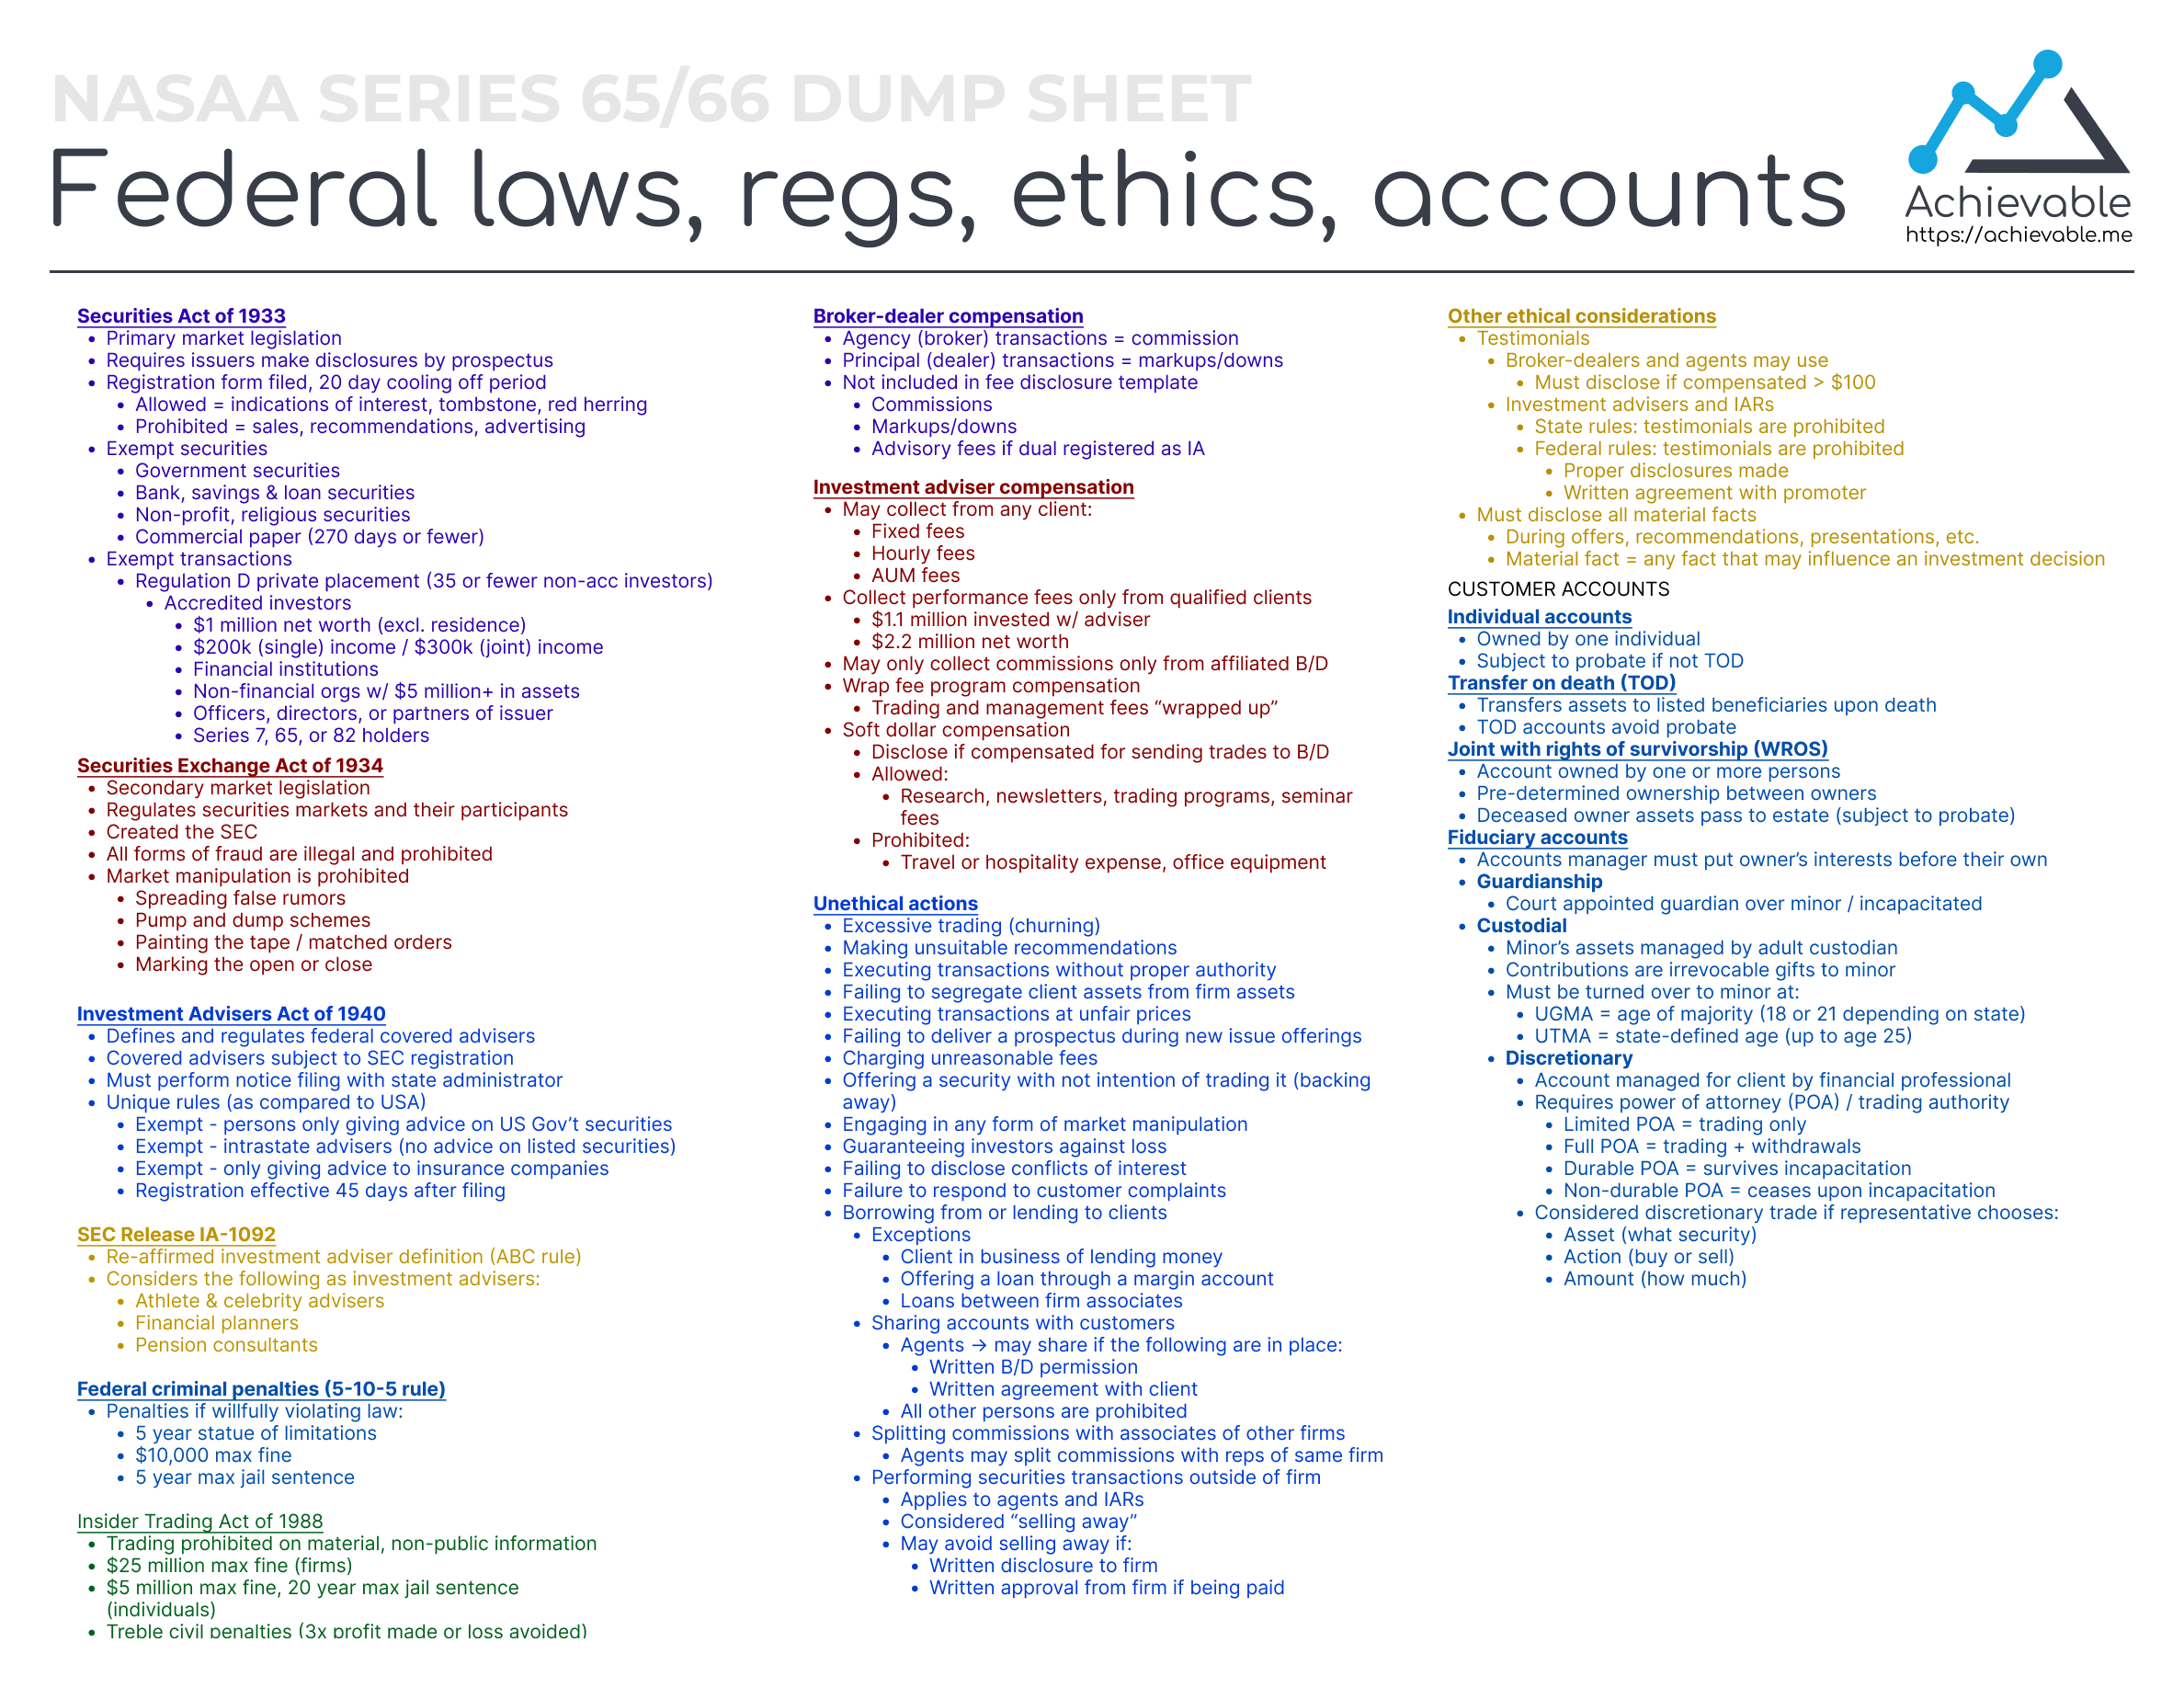 Series 65 Dump Sheet - Federal Laws, Regs, Ethics, and Accounts